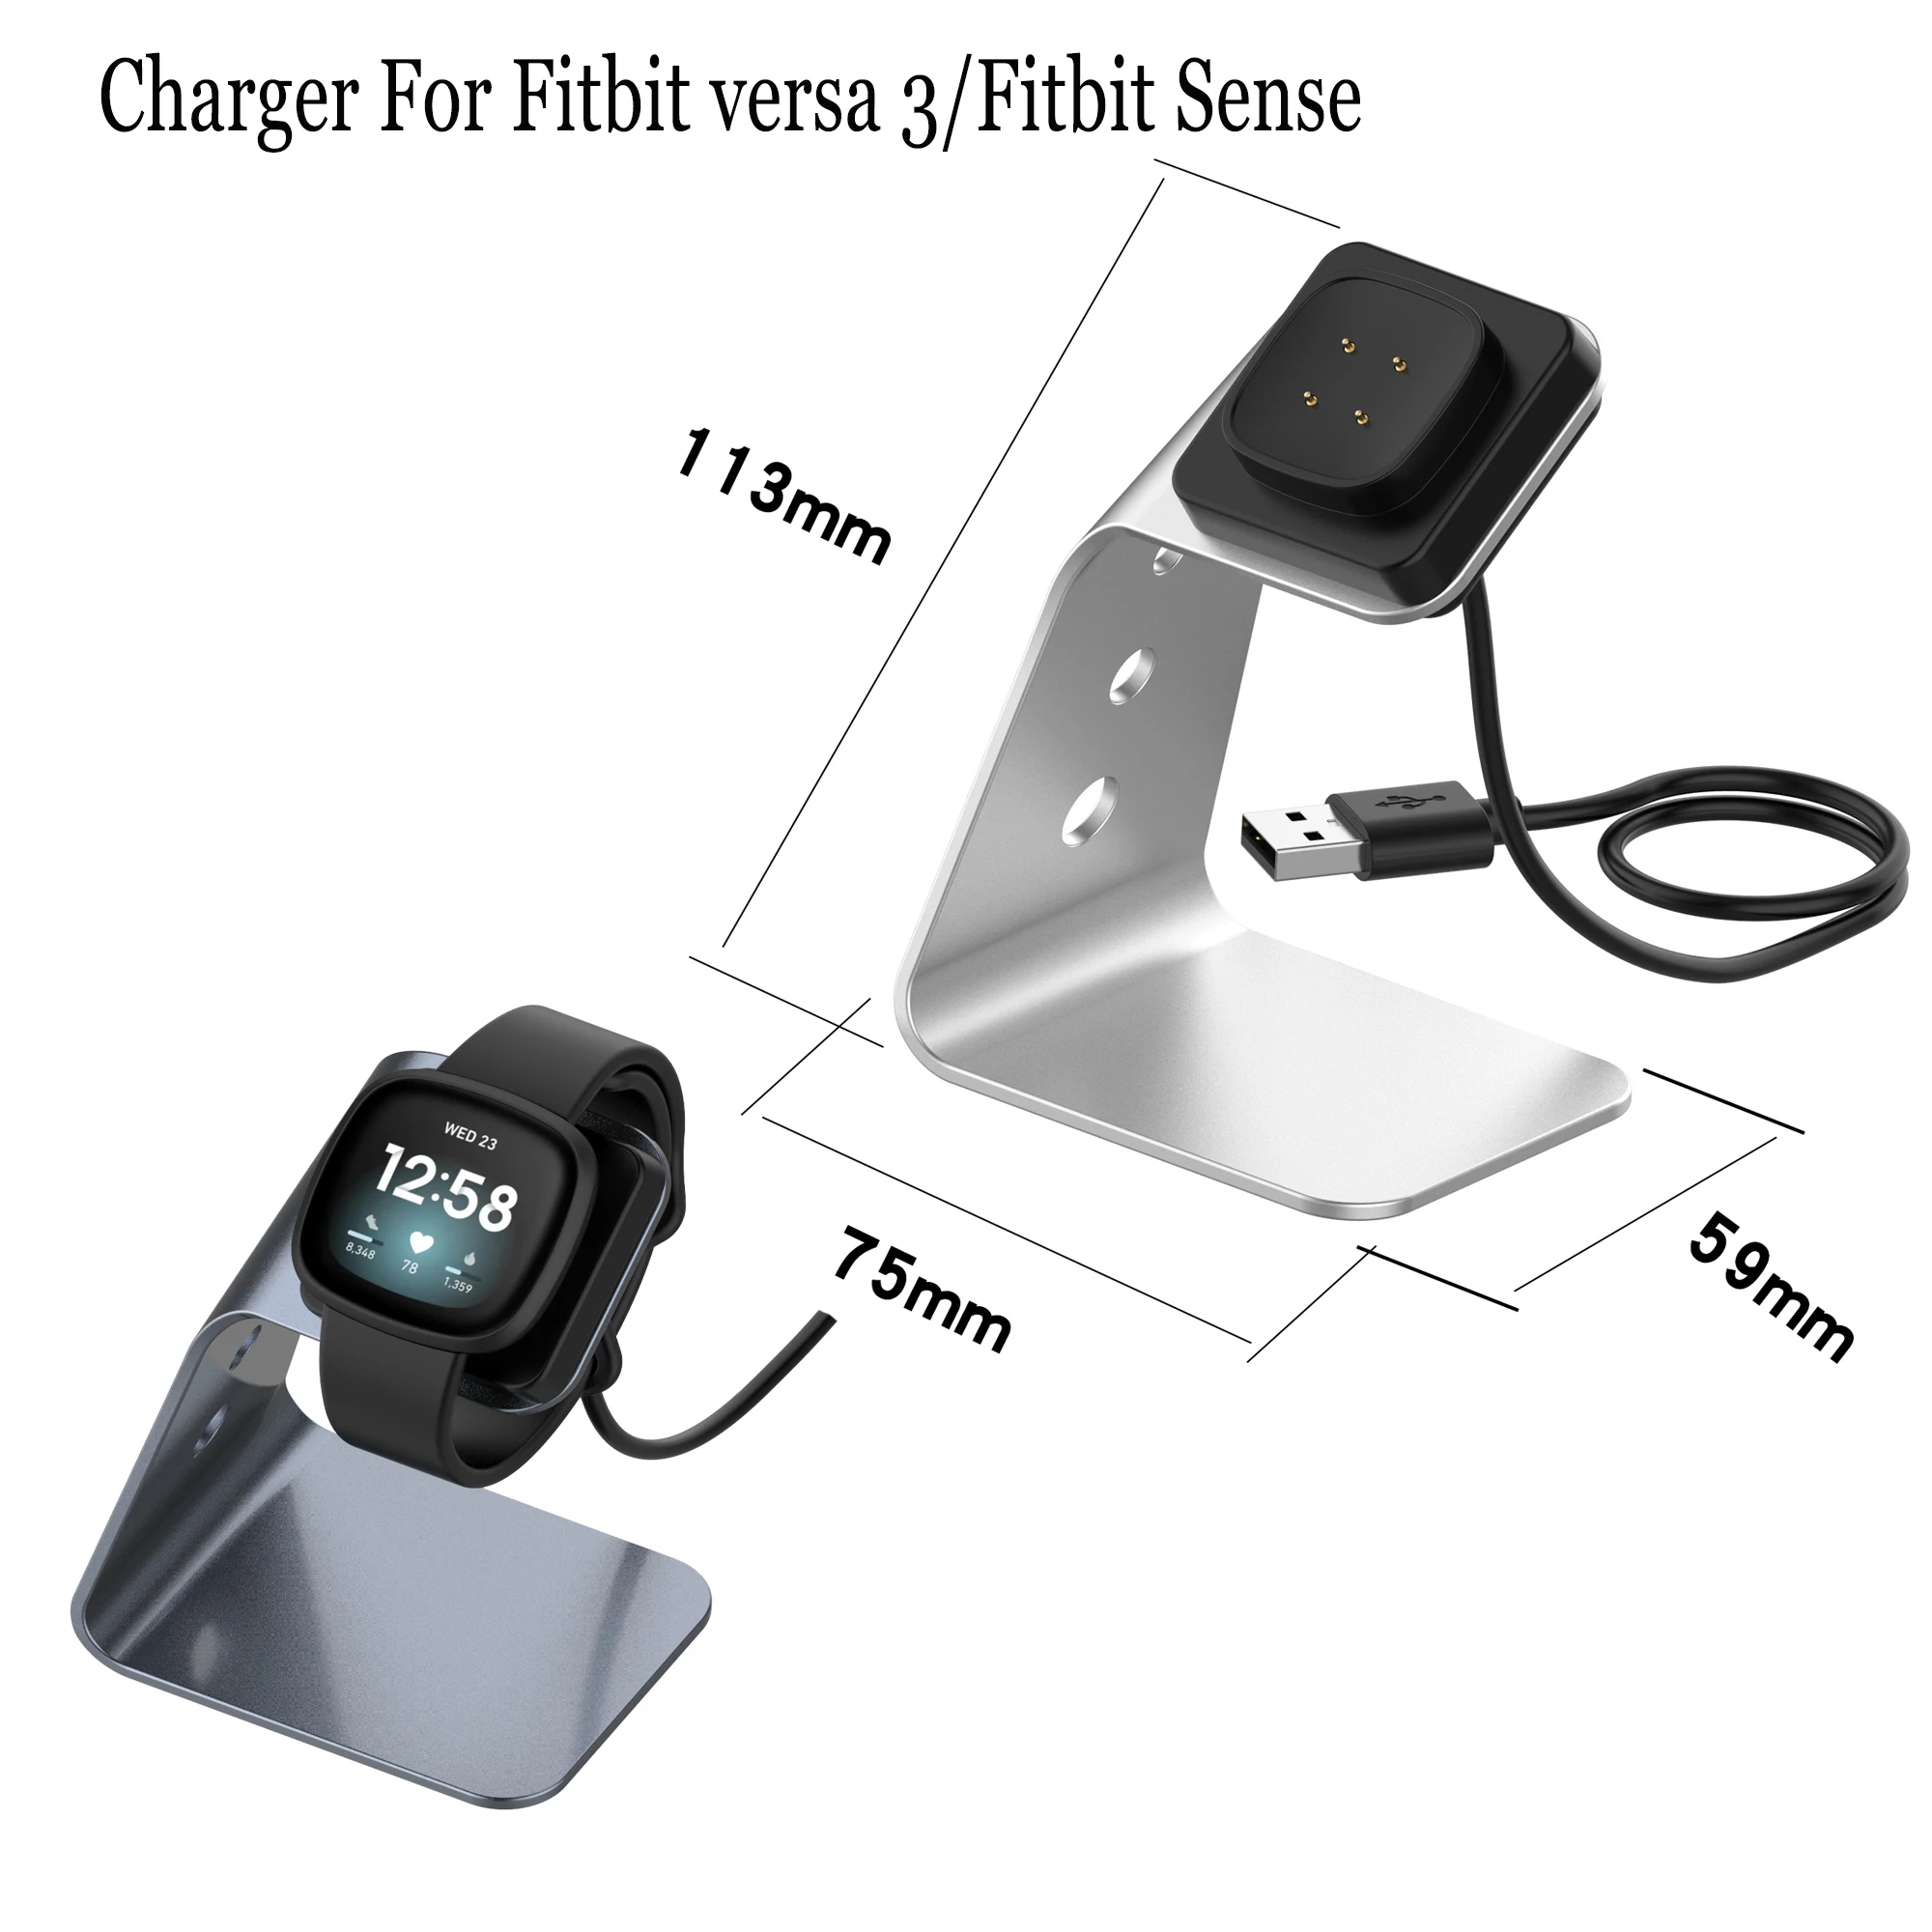 KIMILAR Charger Compatible with Fitbit Sense/Fitbit Versa 3 Charging Station, 